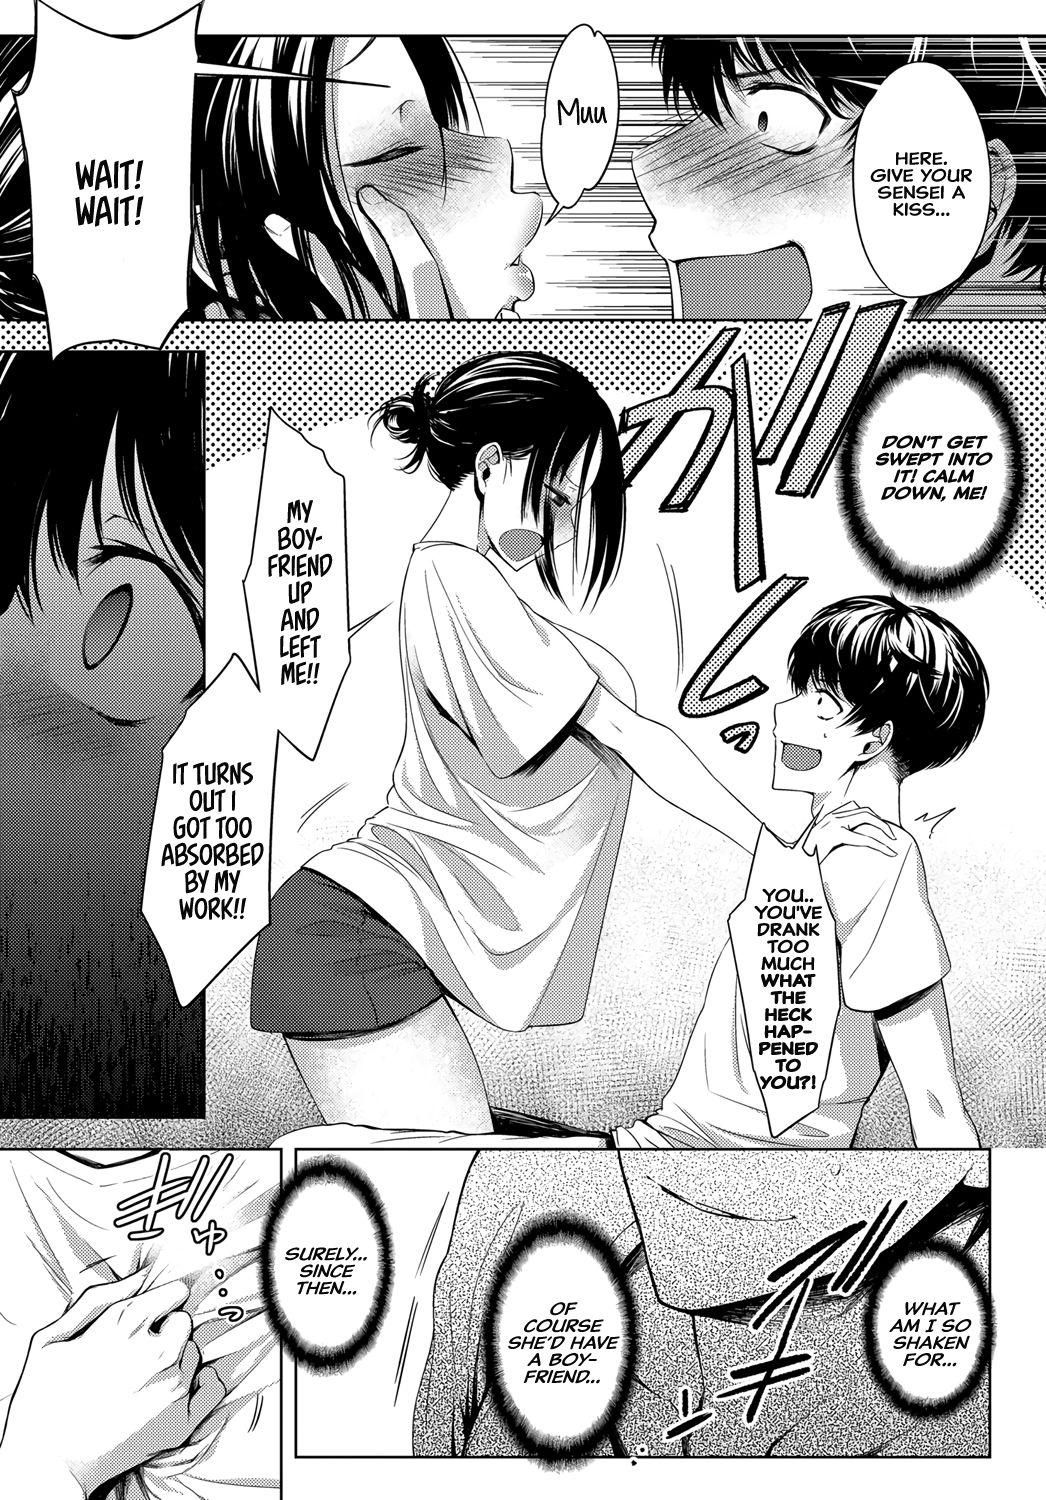 Masterbate 5nenme no houkago | 5th Year After School Monstercock - Page 7